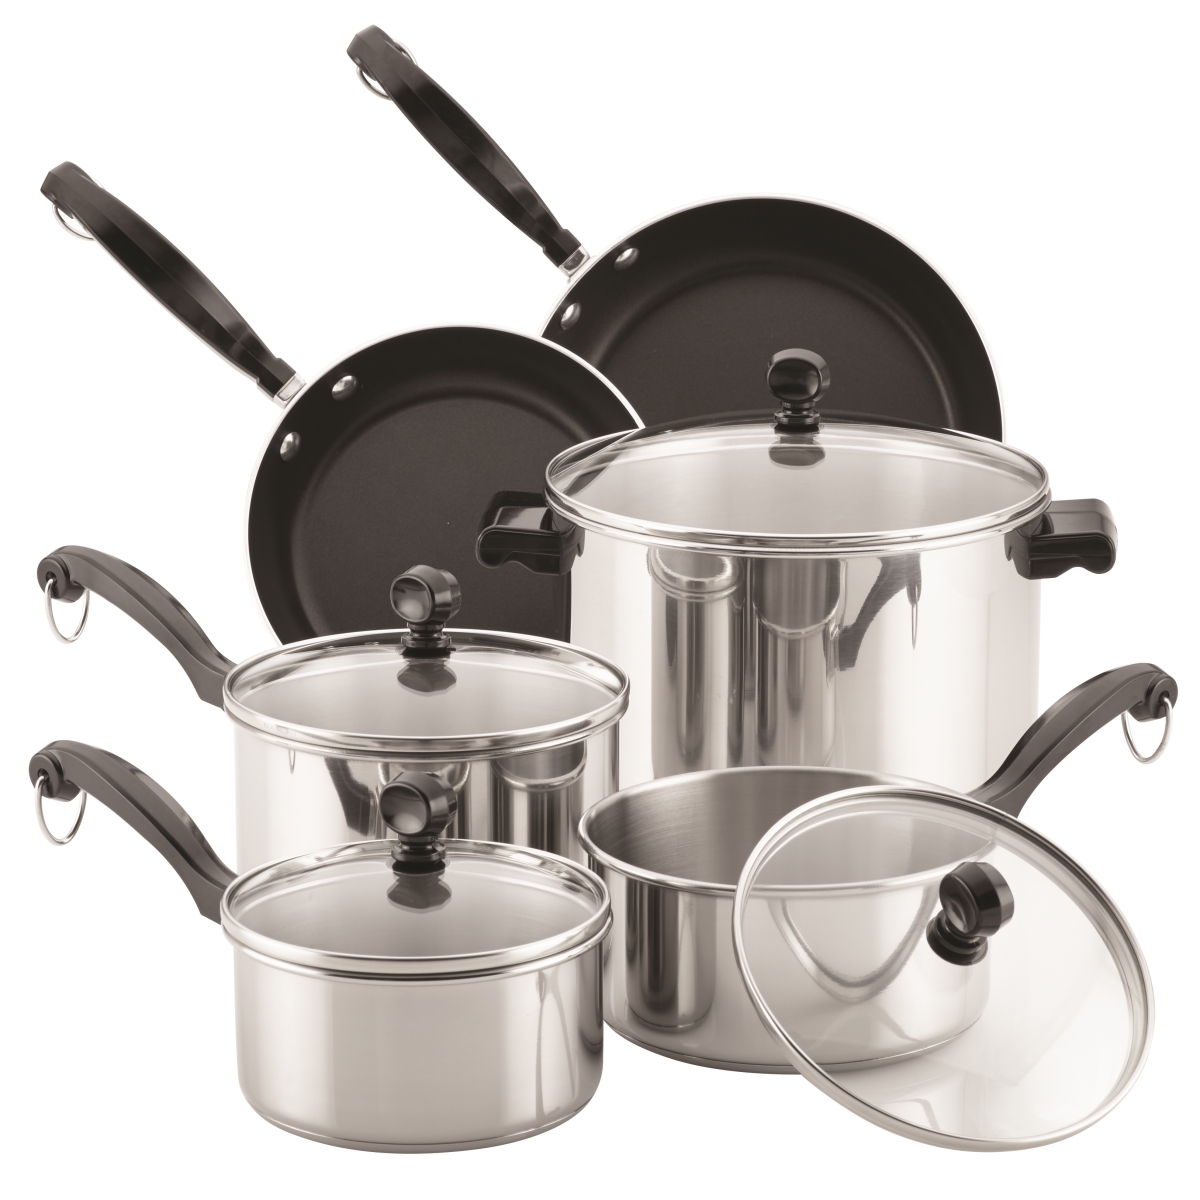 70122 Classic Series Stainless Steel Cookware Set - 12 Piece